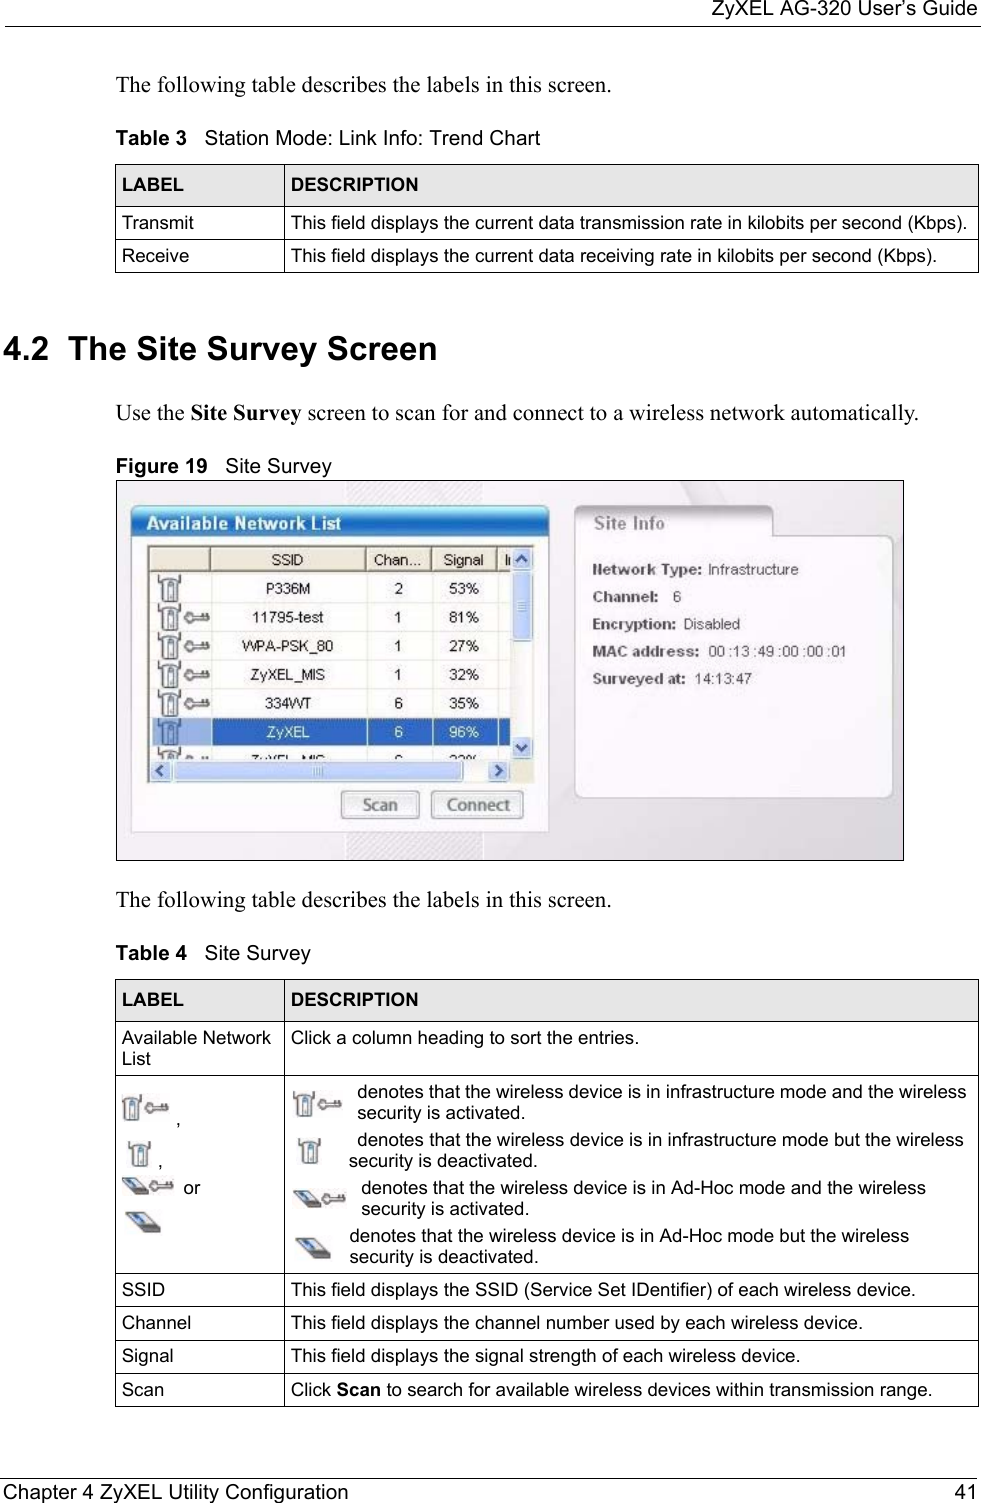 ZyXEL AG-320 User’s GuideChapter 4 ZyXEL Utility Configuration 41The following table describes the labels in this screen. 4.2  The Site Survey Screen Use the Site Survey screen to scan for and connect to a wireless network automatically.Figure 19   Site Survey The following table describes the labels in this screen. Table 3   Station Mode: Link Info: Trend Chart LABEL DESCRIPTIONTransmit This field displays the current data transmission rate in kilobits per second (Kbps).Receive This field displays the current data receiving rate in kilobits per second (Kbps).Table 4   Site Survey LABEL DESCRIPTIONAvailable Network ListClick a column heading to sort the entries.,, ordenotes that the wireless device is in infrastructure mode and the wireless security is activated.denotes that the wireless device is in infrastructure mode but the wireless security is deactivated.denotes that the wireless device is in Ad-Hoc mode and the wireless security is activated.denotes that the wireless device is in Ad-Hoc mode but the wireless security is deactivated.SSID This field displays the SSID (Service Set IDentifier) of each wireless device.Channel This field displays the channel number used by each wireless device.Signal This field displays the signal strength of each wireless device.Scan Click Scan to search for available wireless devices within transmission range.